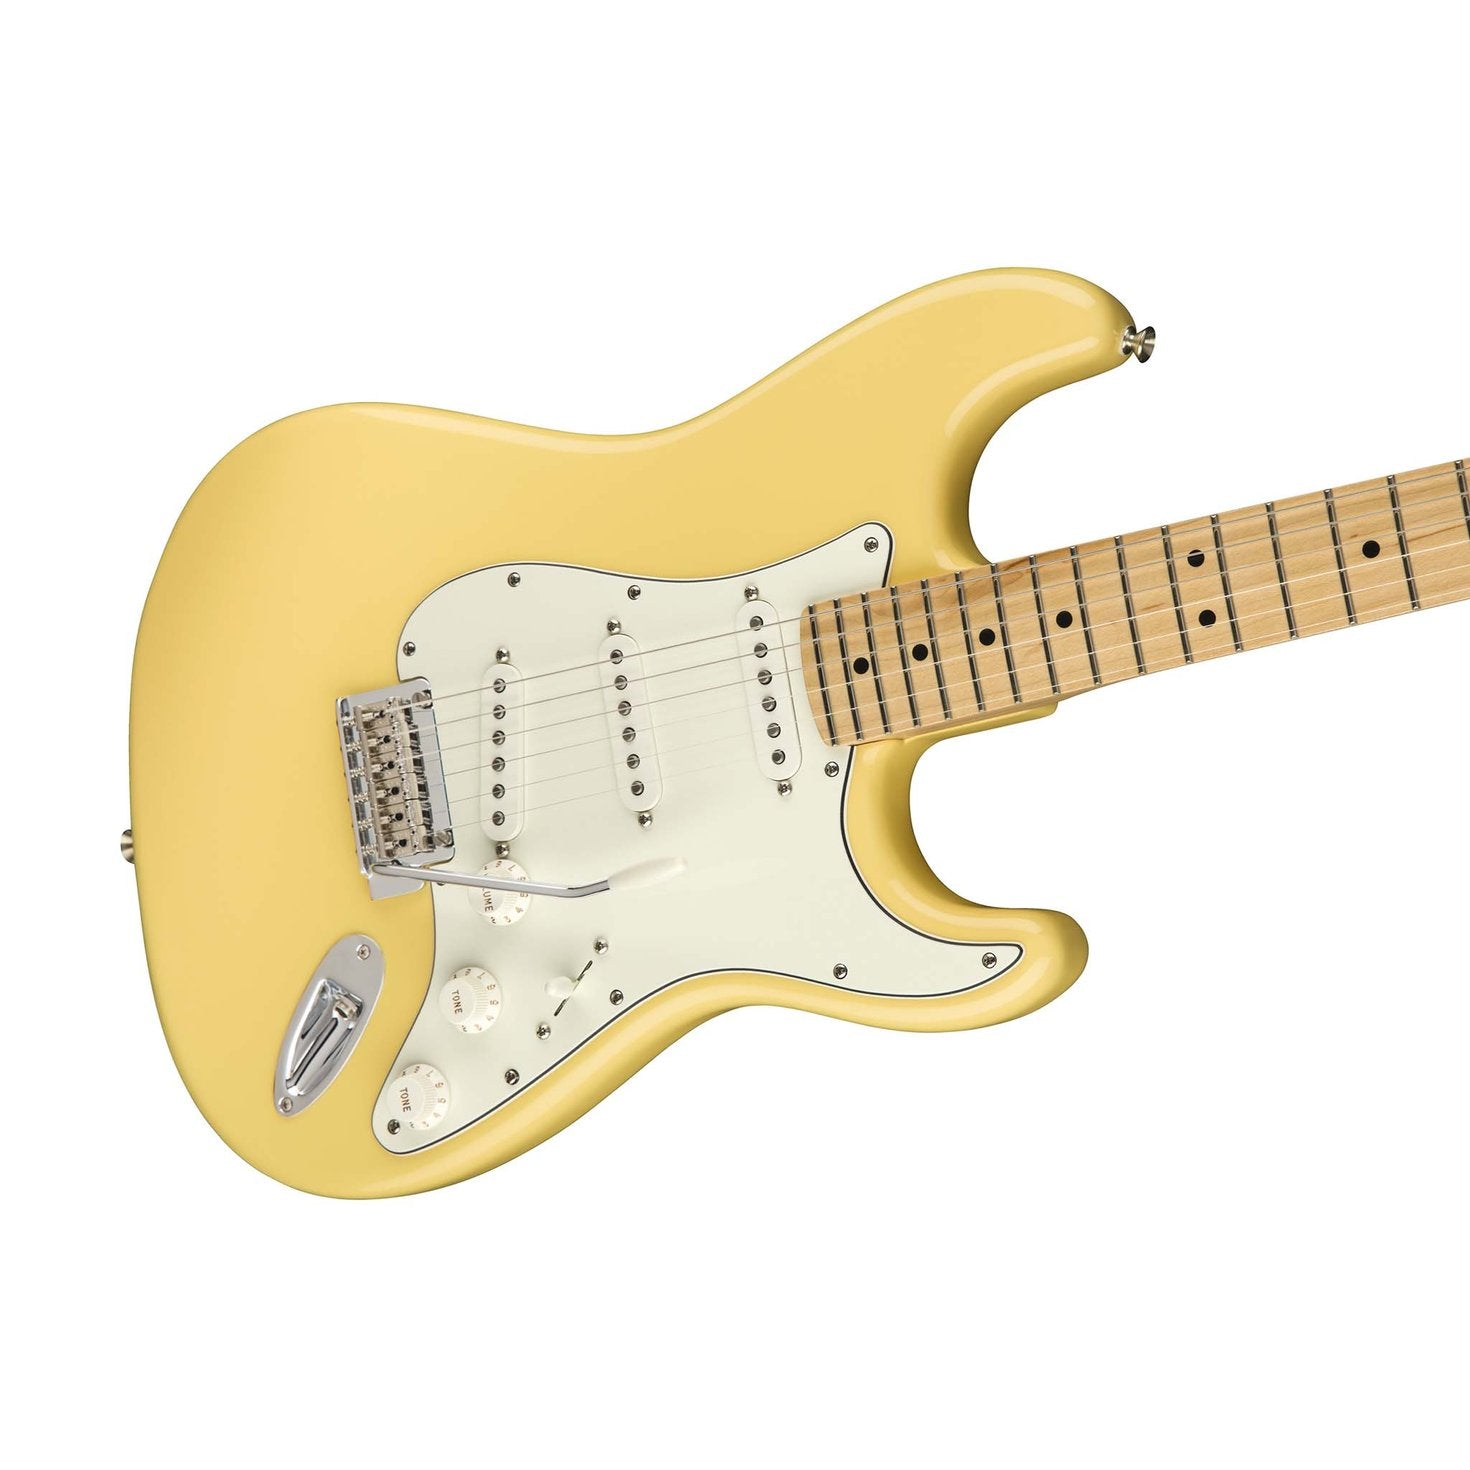 Fender Player Stratocaster Electric Guitar, Maple FB, Buttercream, FENDER, ELECTRIC GUITAR, fender-eletric-guitar-f03-014-4502-534, ZOSO MUSIC SDN BHD